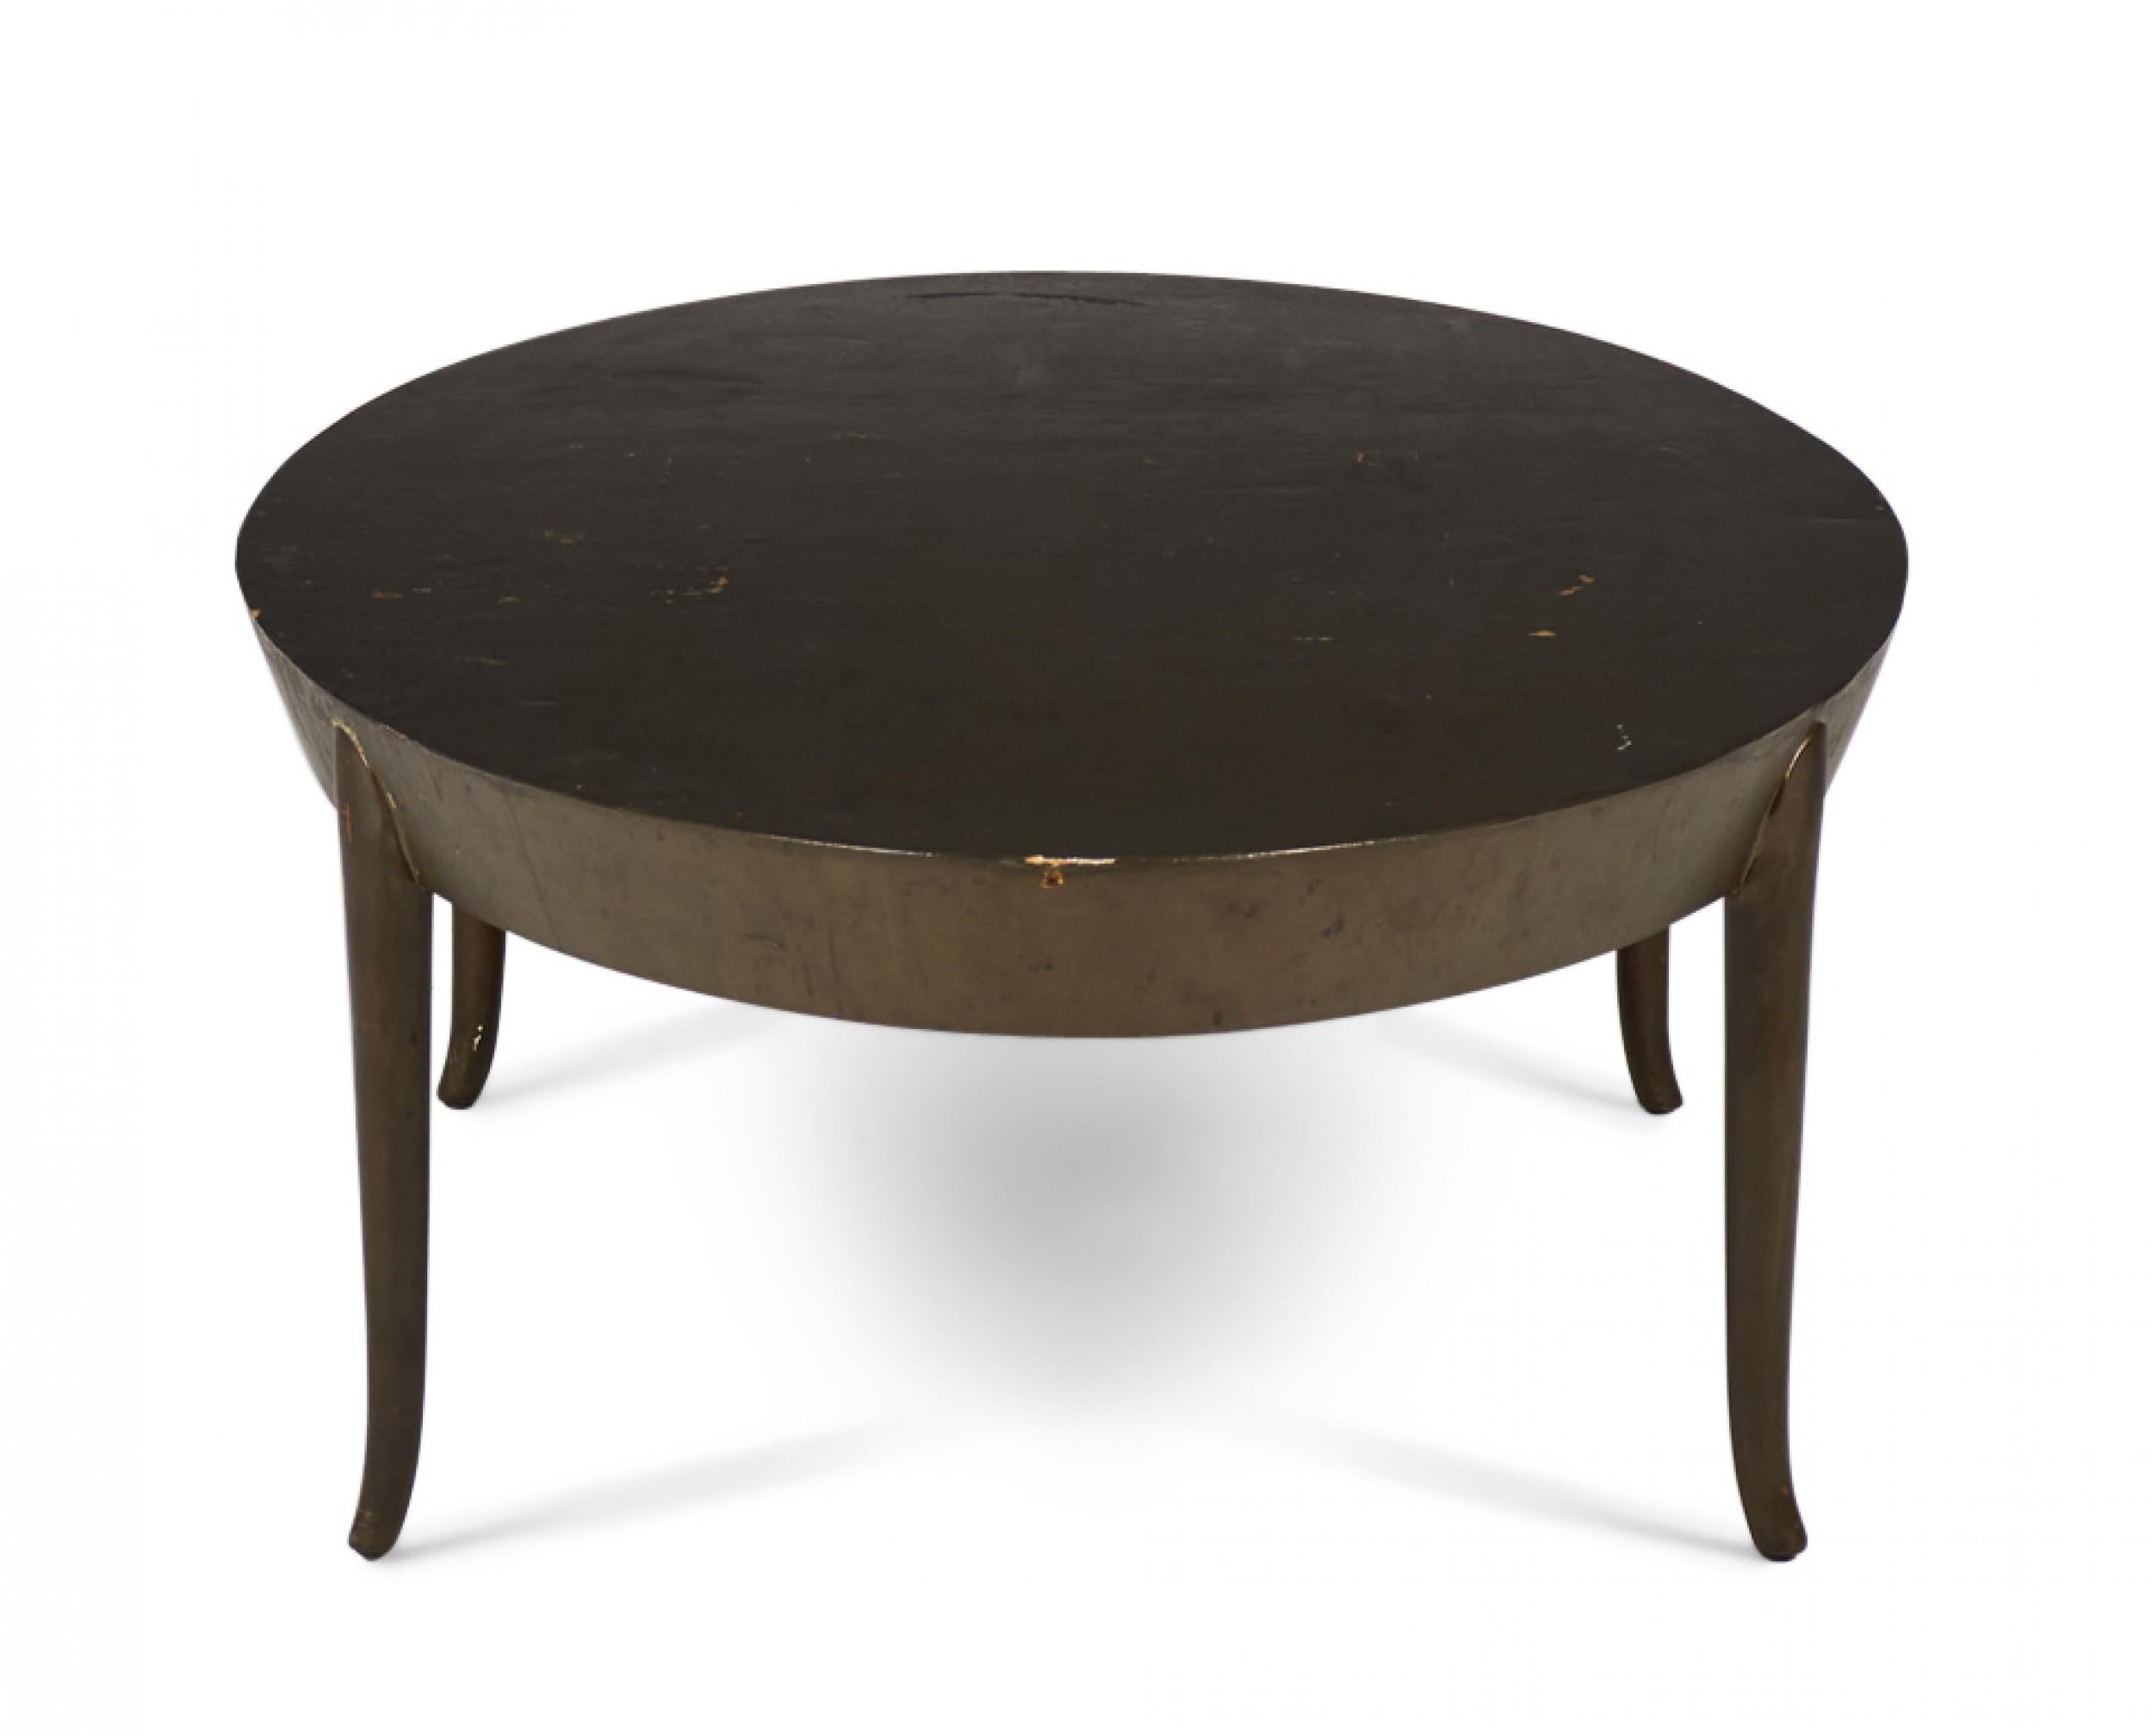 T.H. Robsjohn-Gibbings American Mid-Century Oval Wooden Cocktail / Coffee Table For Sale 2